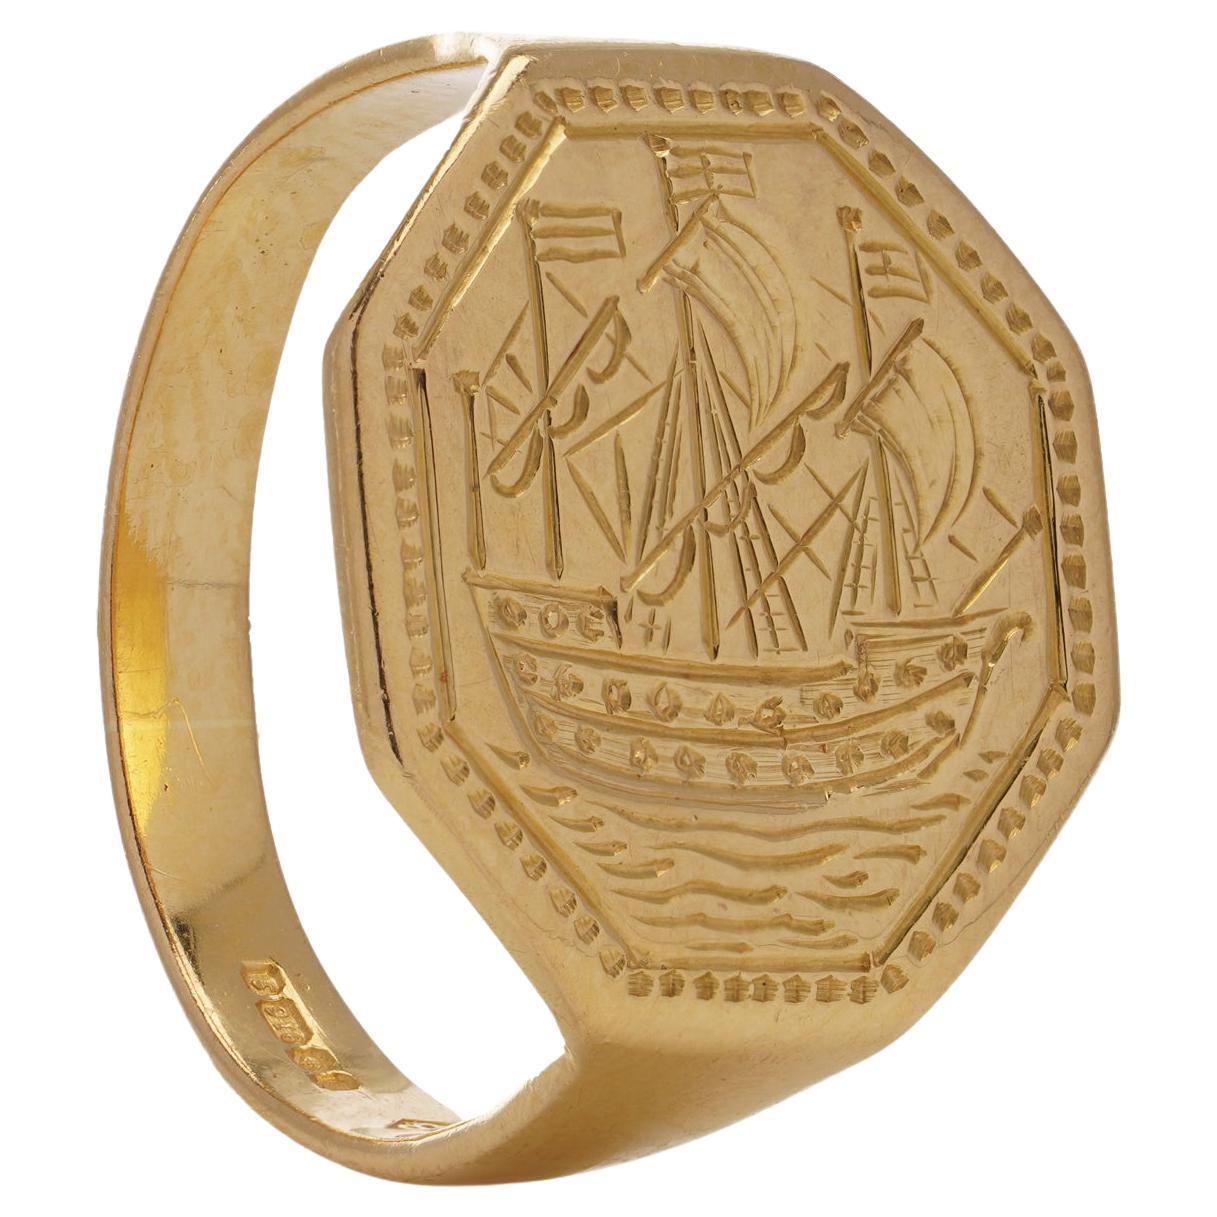 Vintage 22kt. yellow gold signet ring featuring the man-of-war ship